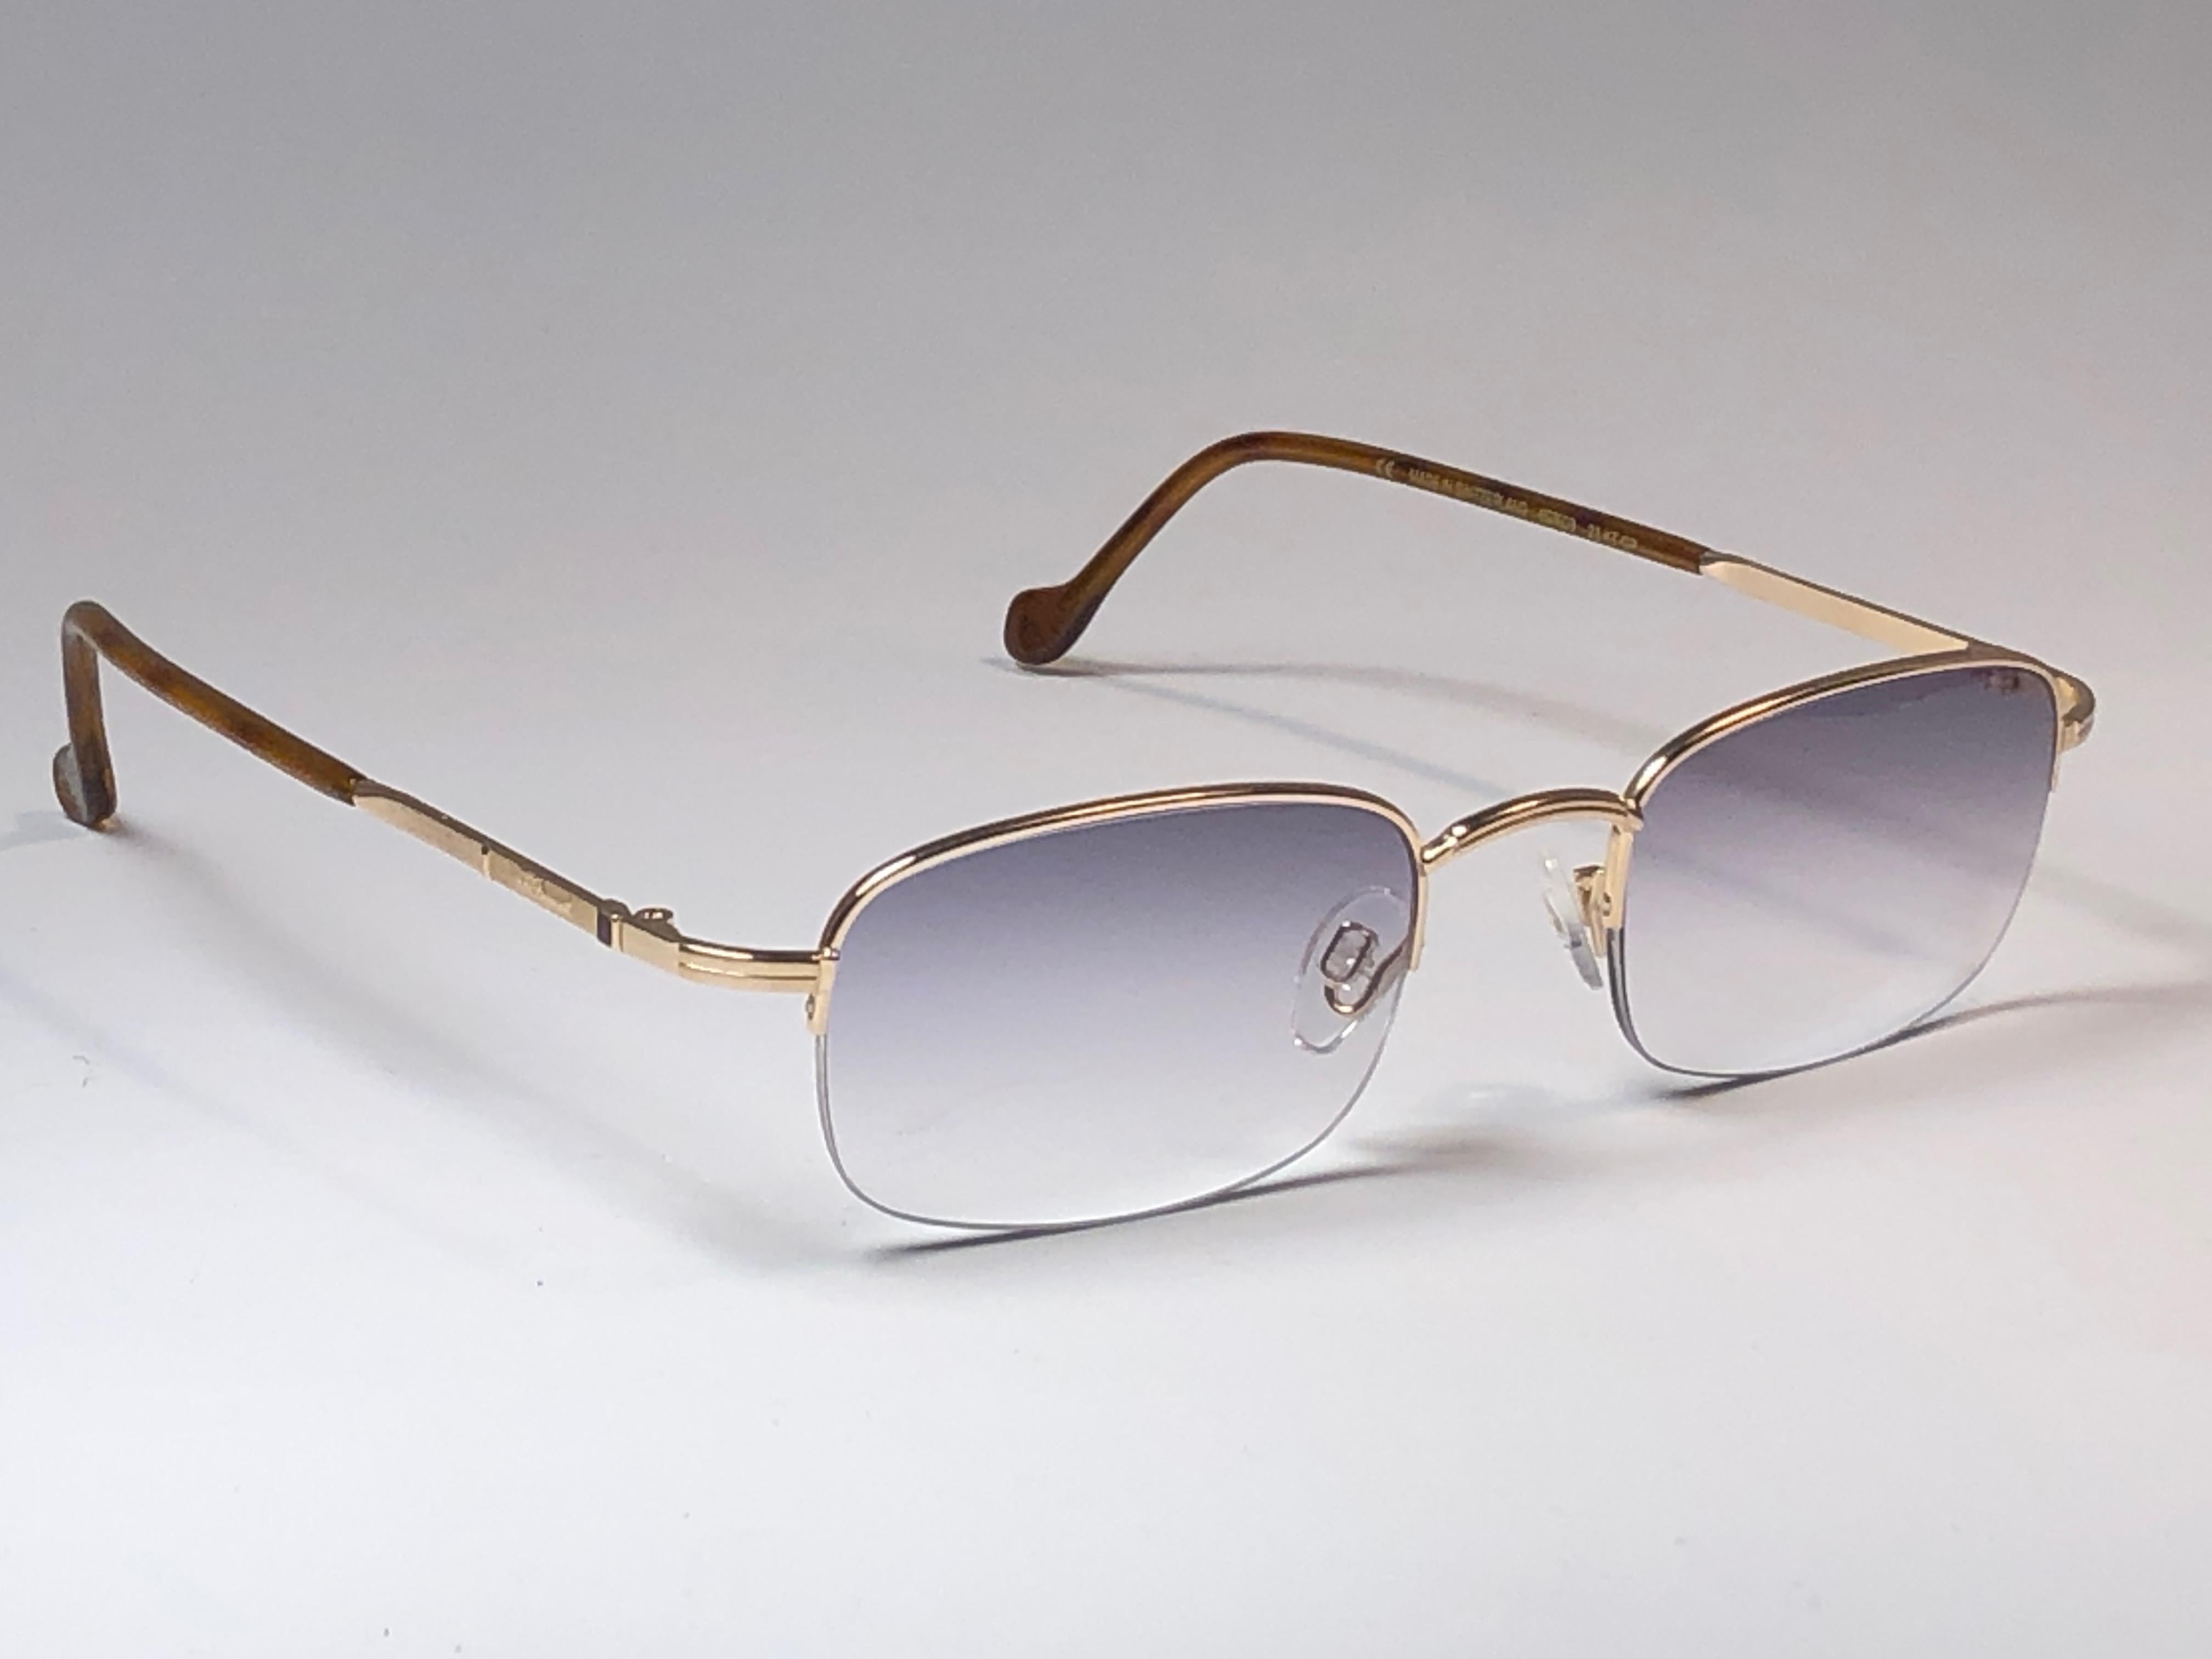 Mint Vintage Dupont 23k gold plated frame. Spotless blue gradient lenses.

Made in Switzerland.
 
Produced and design in 1990's.

This item may show minor sign of wear due to storage.